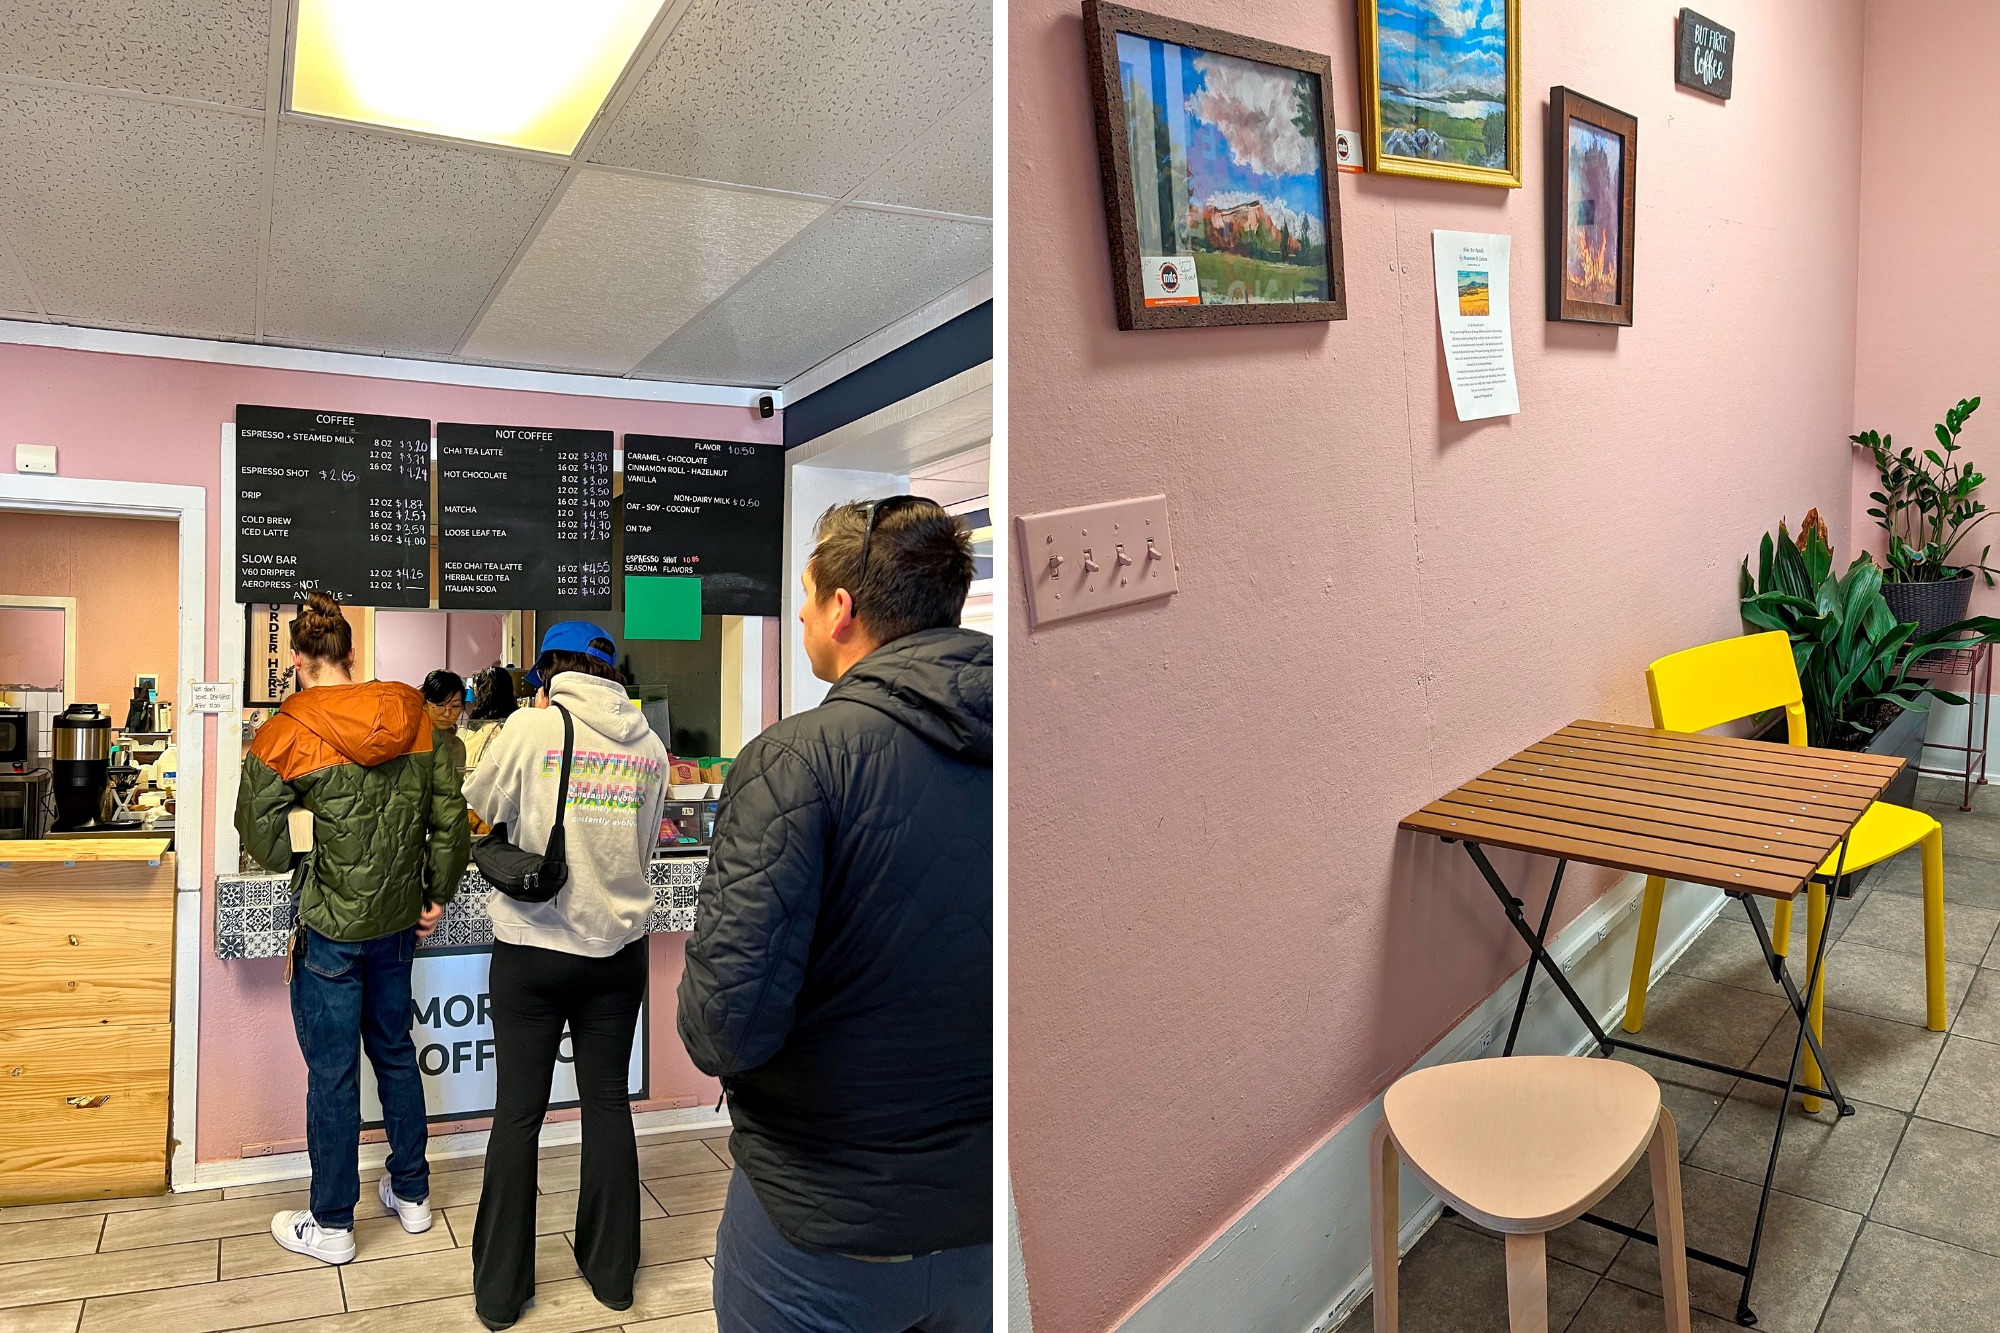 Two images at Amor Ciego: people waiting in line and a petite table and chairs